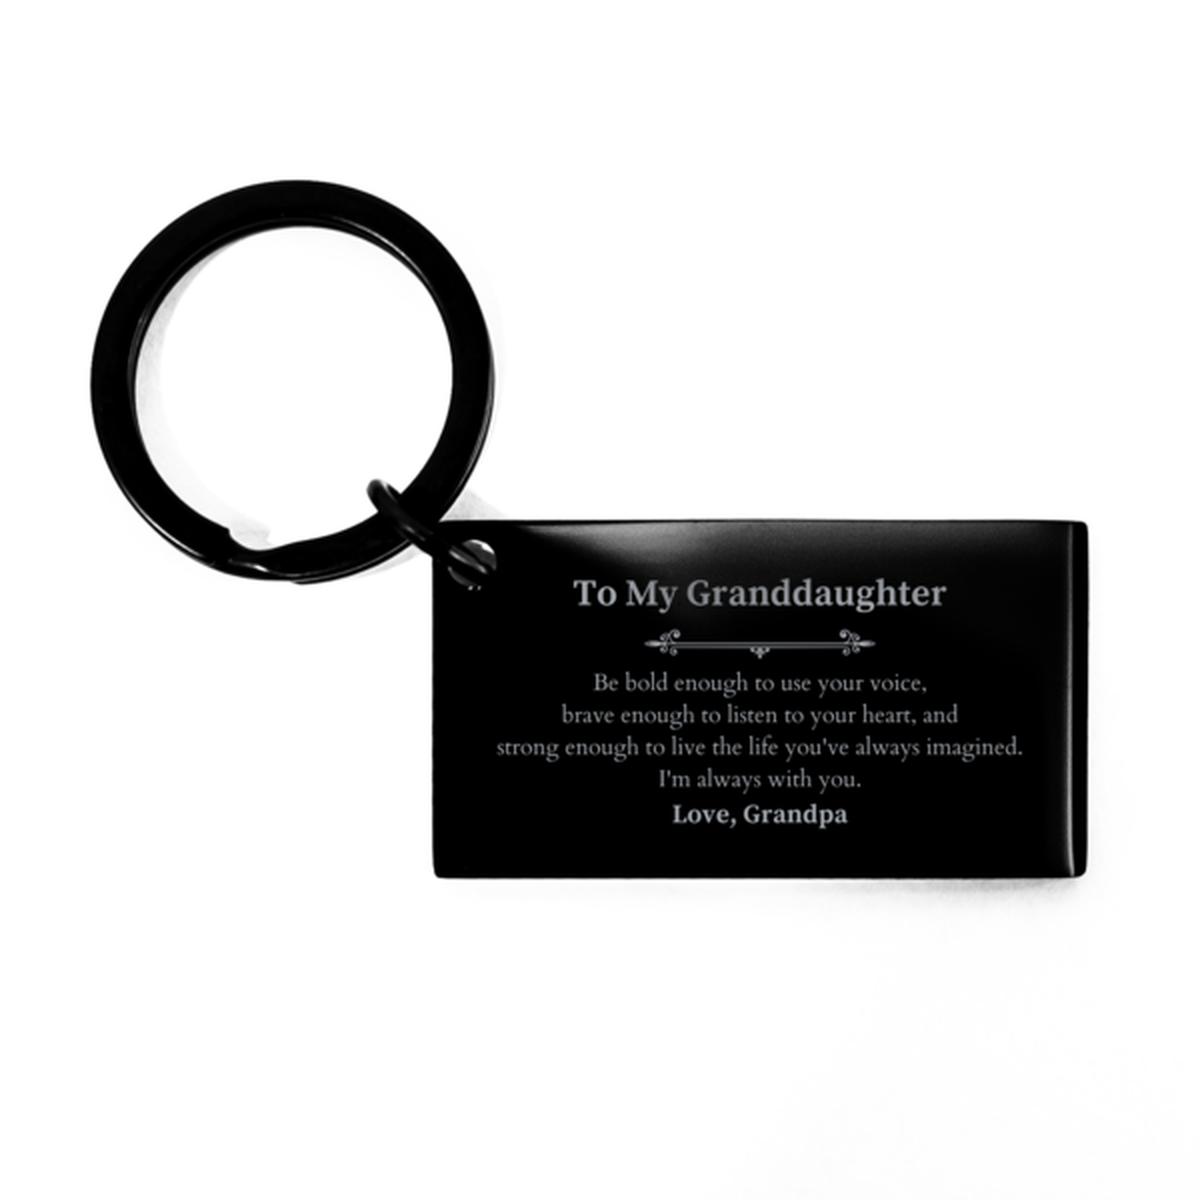 Keepsake Granddaughter Keychain Gift Idea Graduation Christmas Birthday Granddaughter from Grandpa, Granddaughter Be bold enough to use your voice, brave enough to listen to your heart. Love, Grandpa